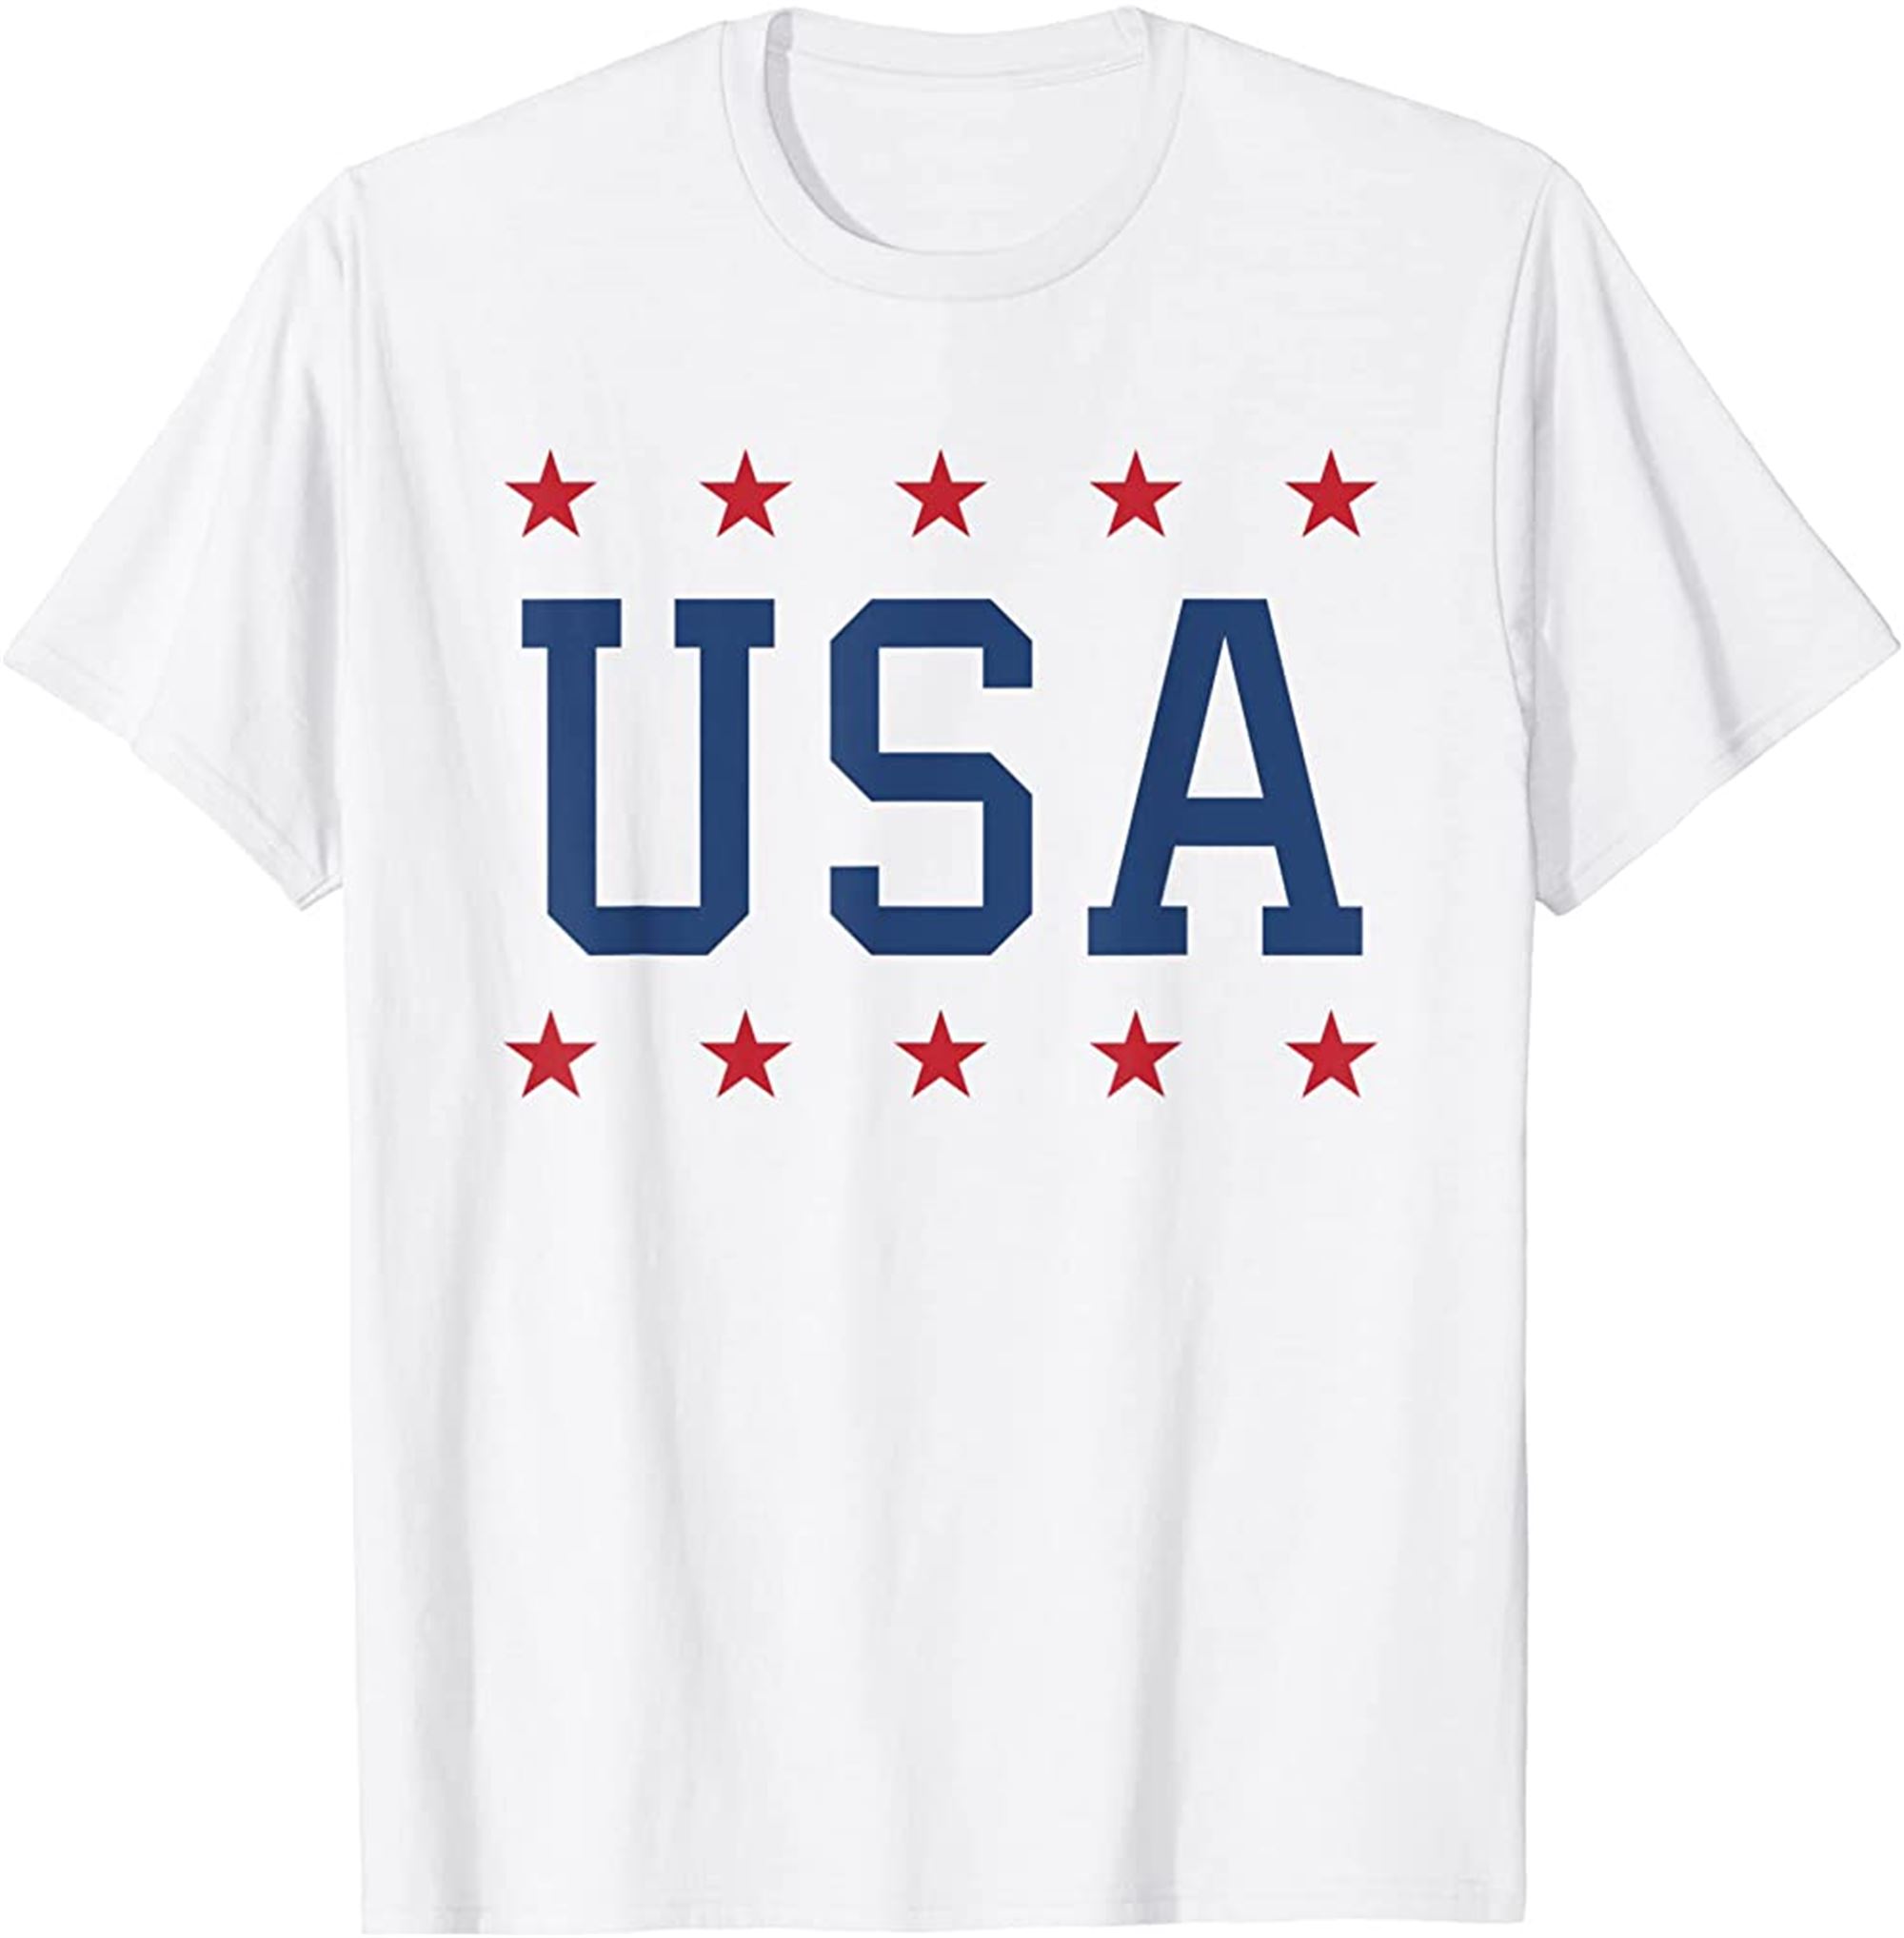 Usa T Shirt Women Men Patriotic American Pride 4th Of July T-shirt Plus Size Up To 5xl